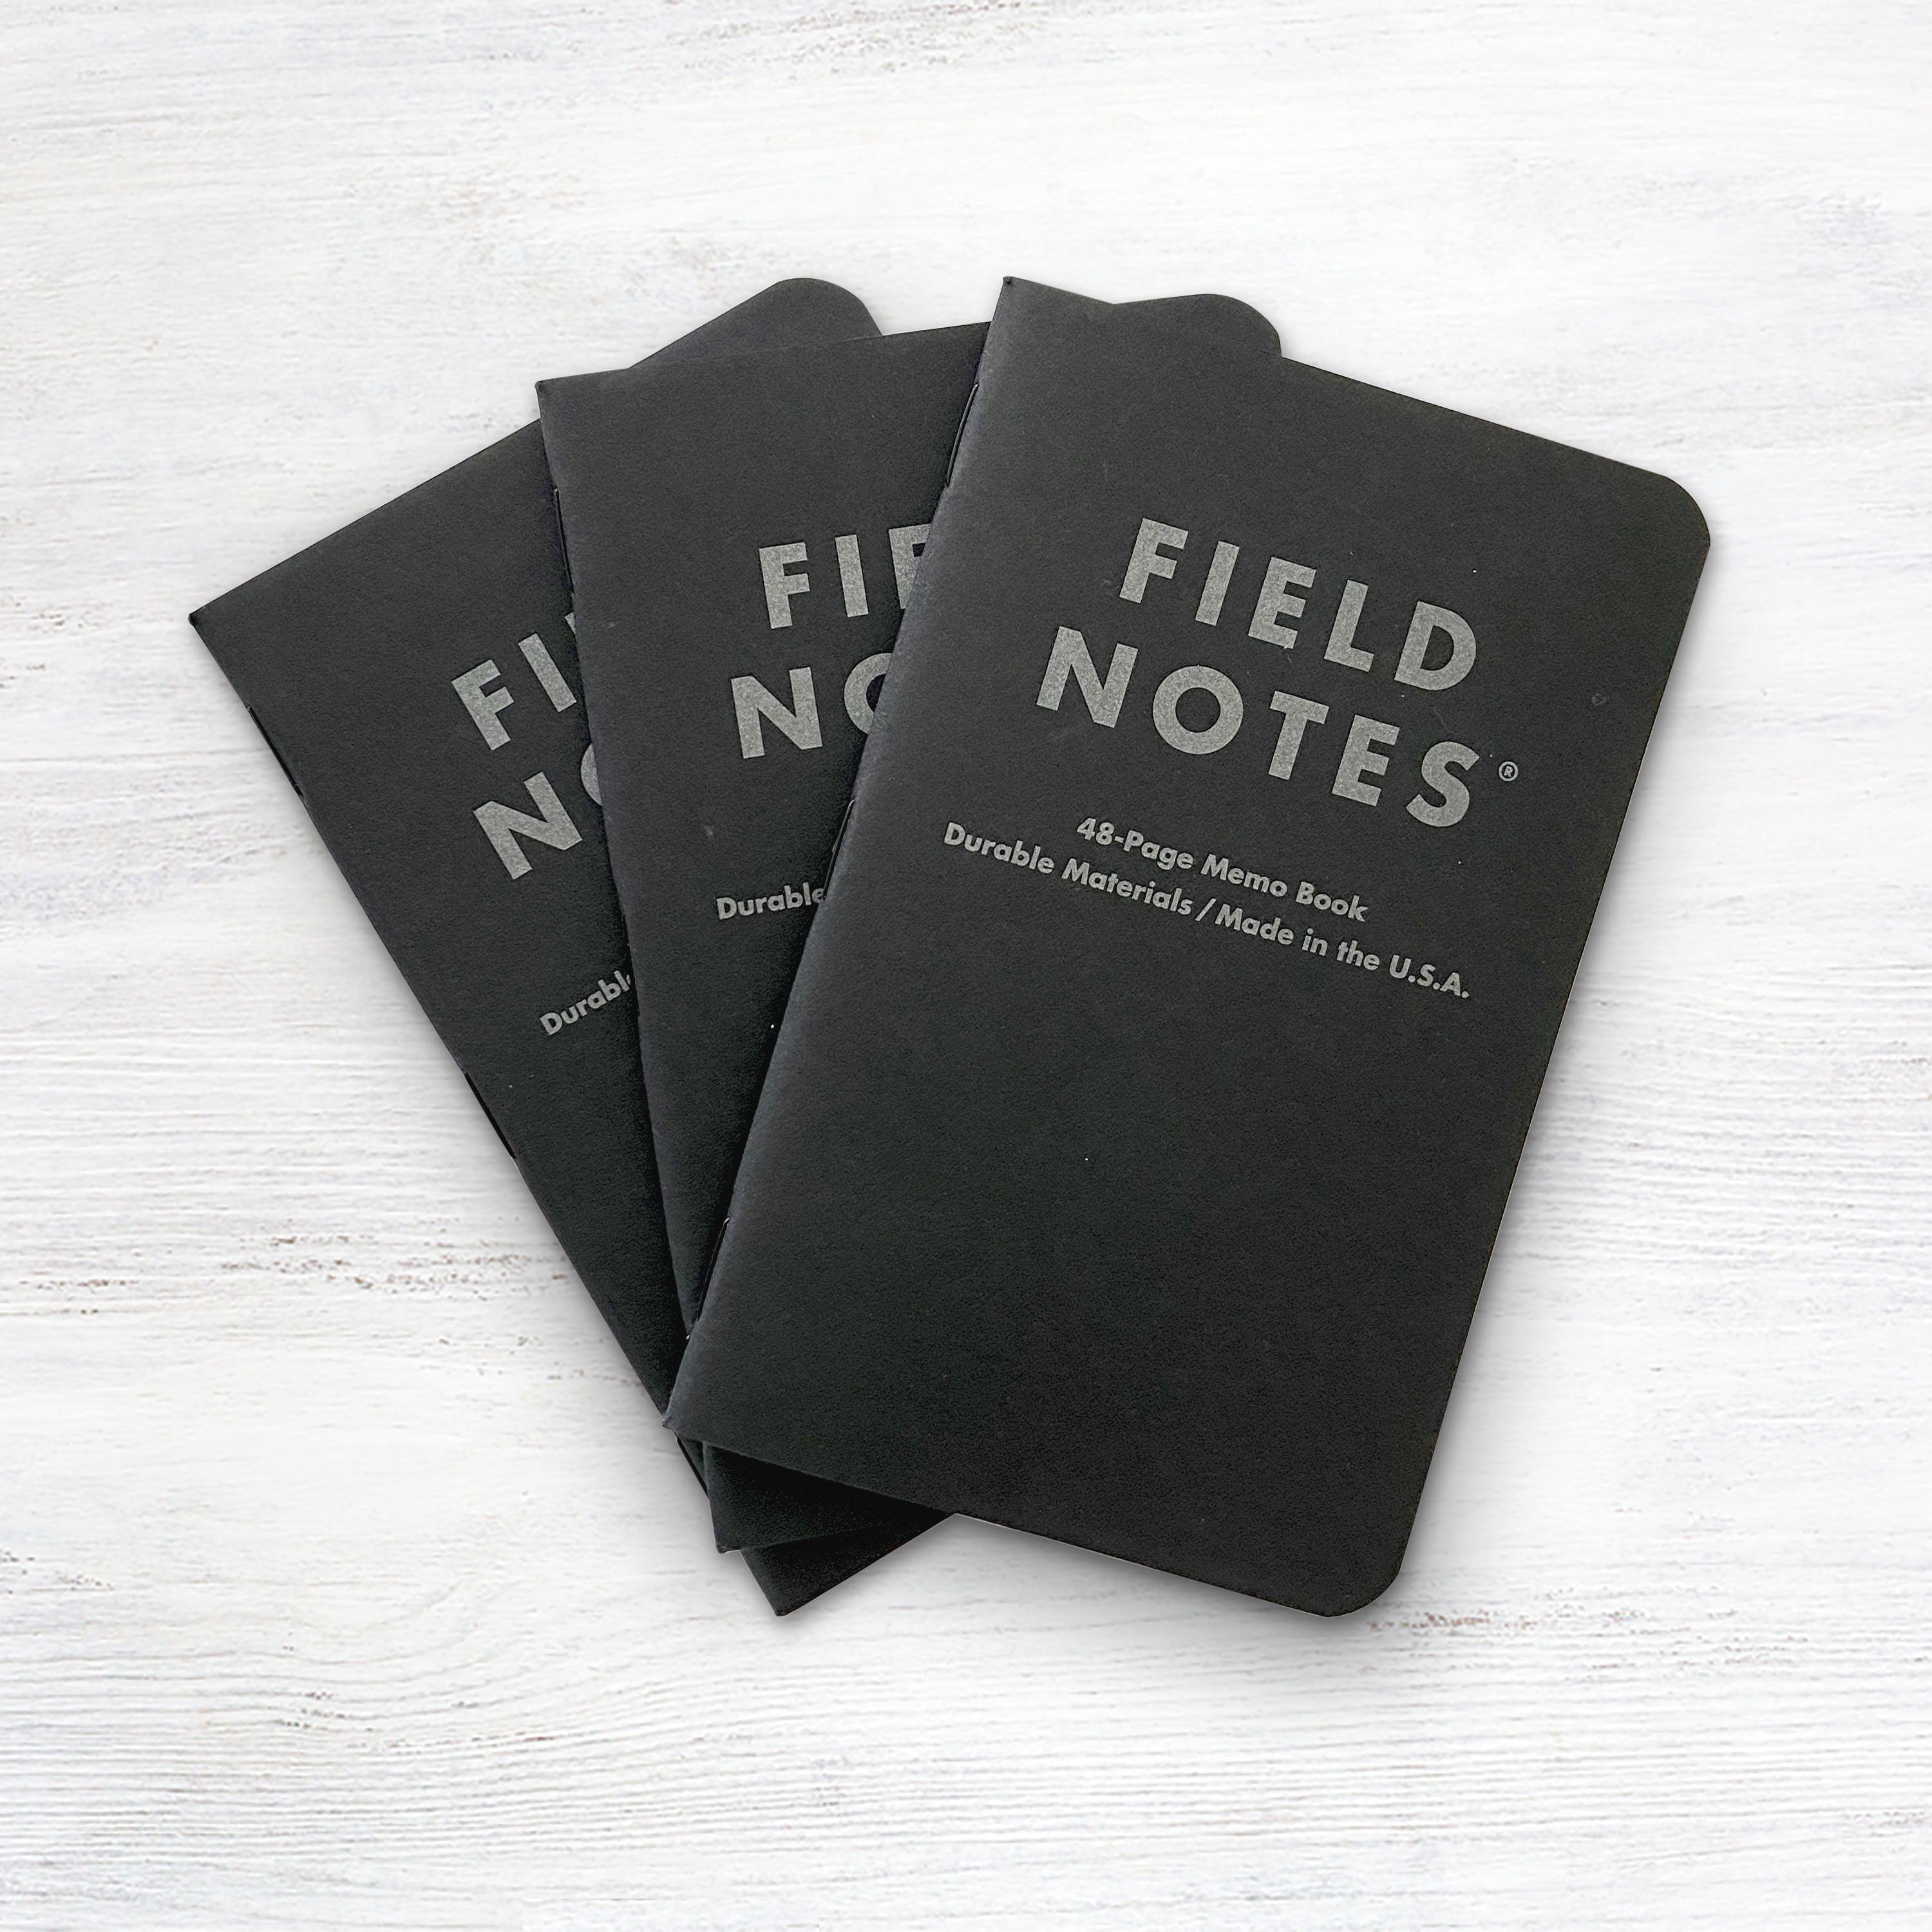 Review – Field Notes Pitch Black (Focused on Large)